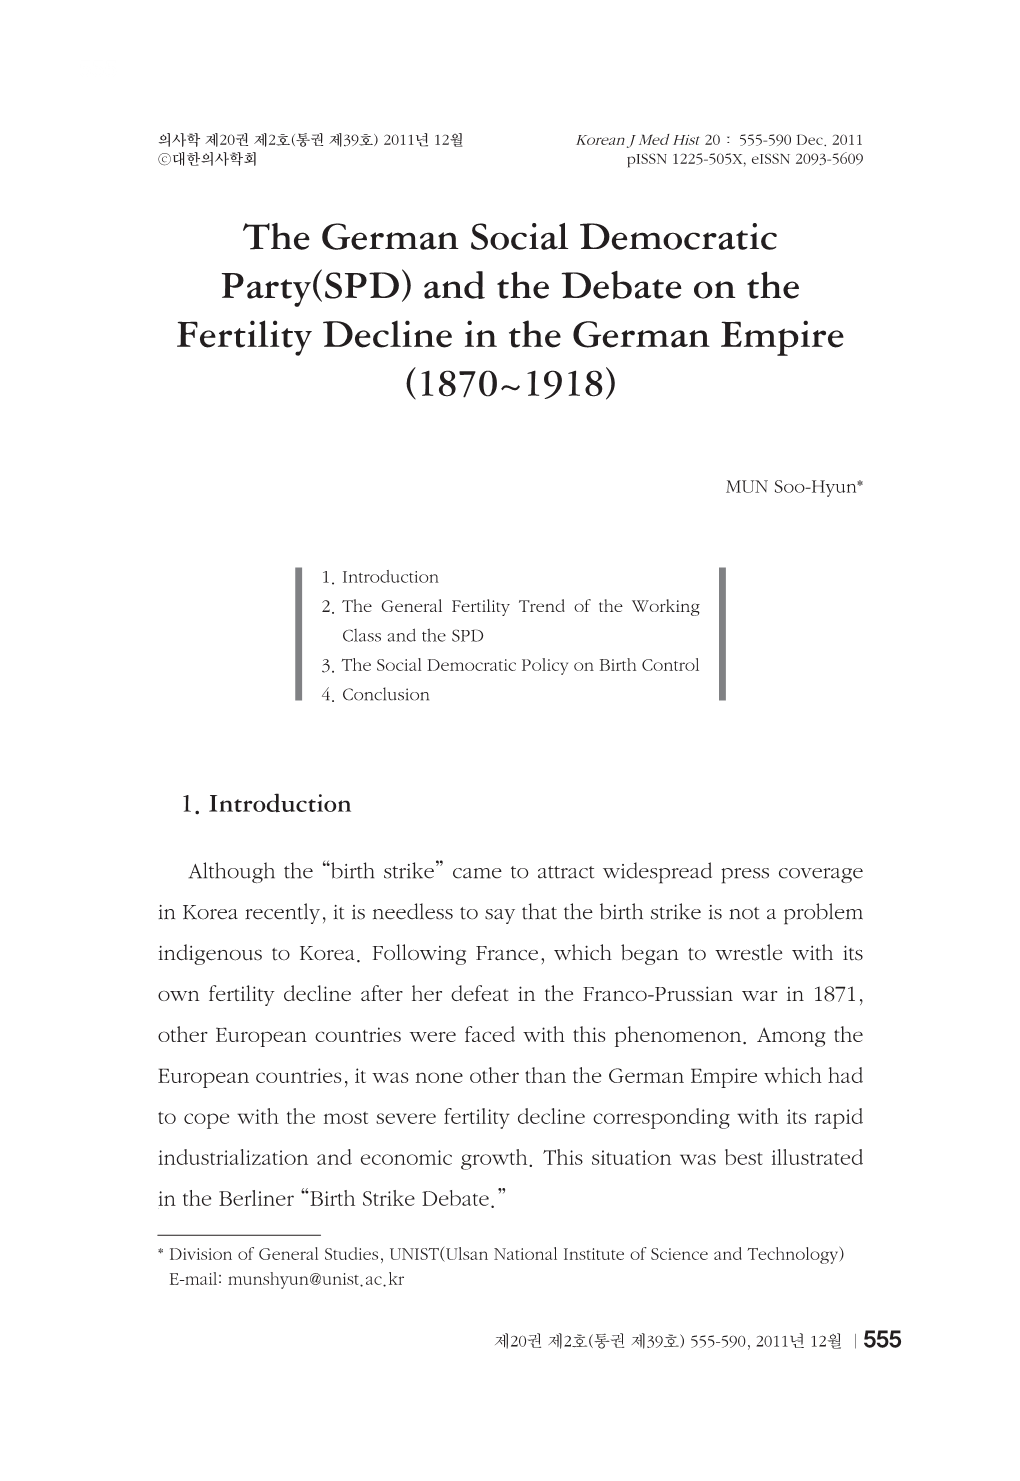 The German Social Democratic Party(SPD) and the Debate on the Fertility Decline in the German Empire (1870~1918)